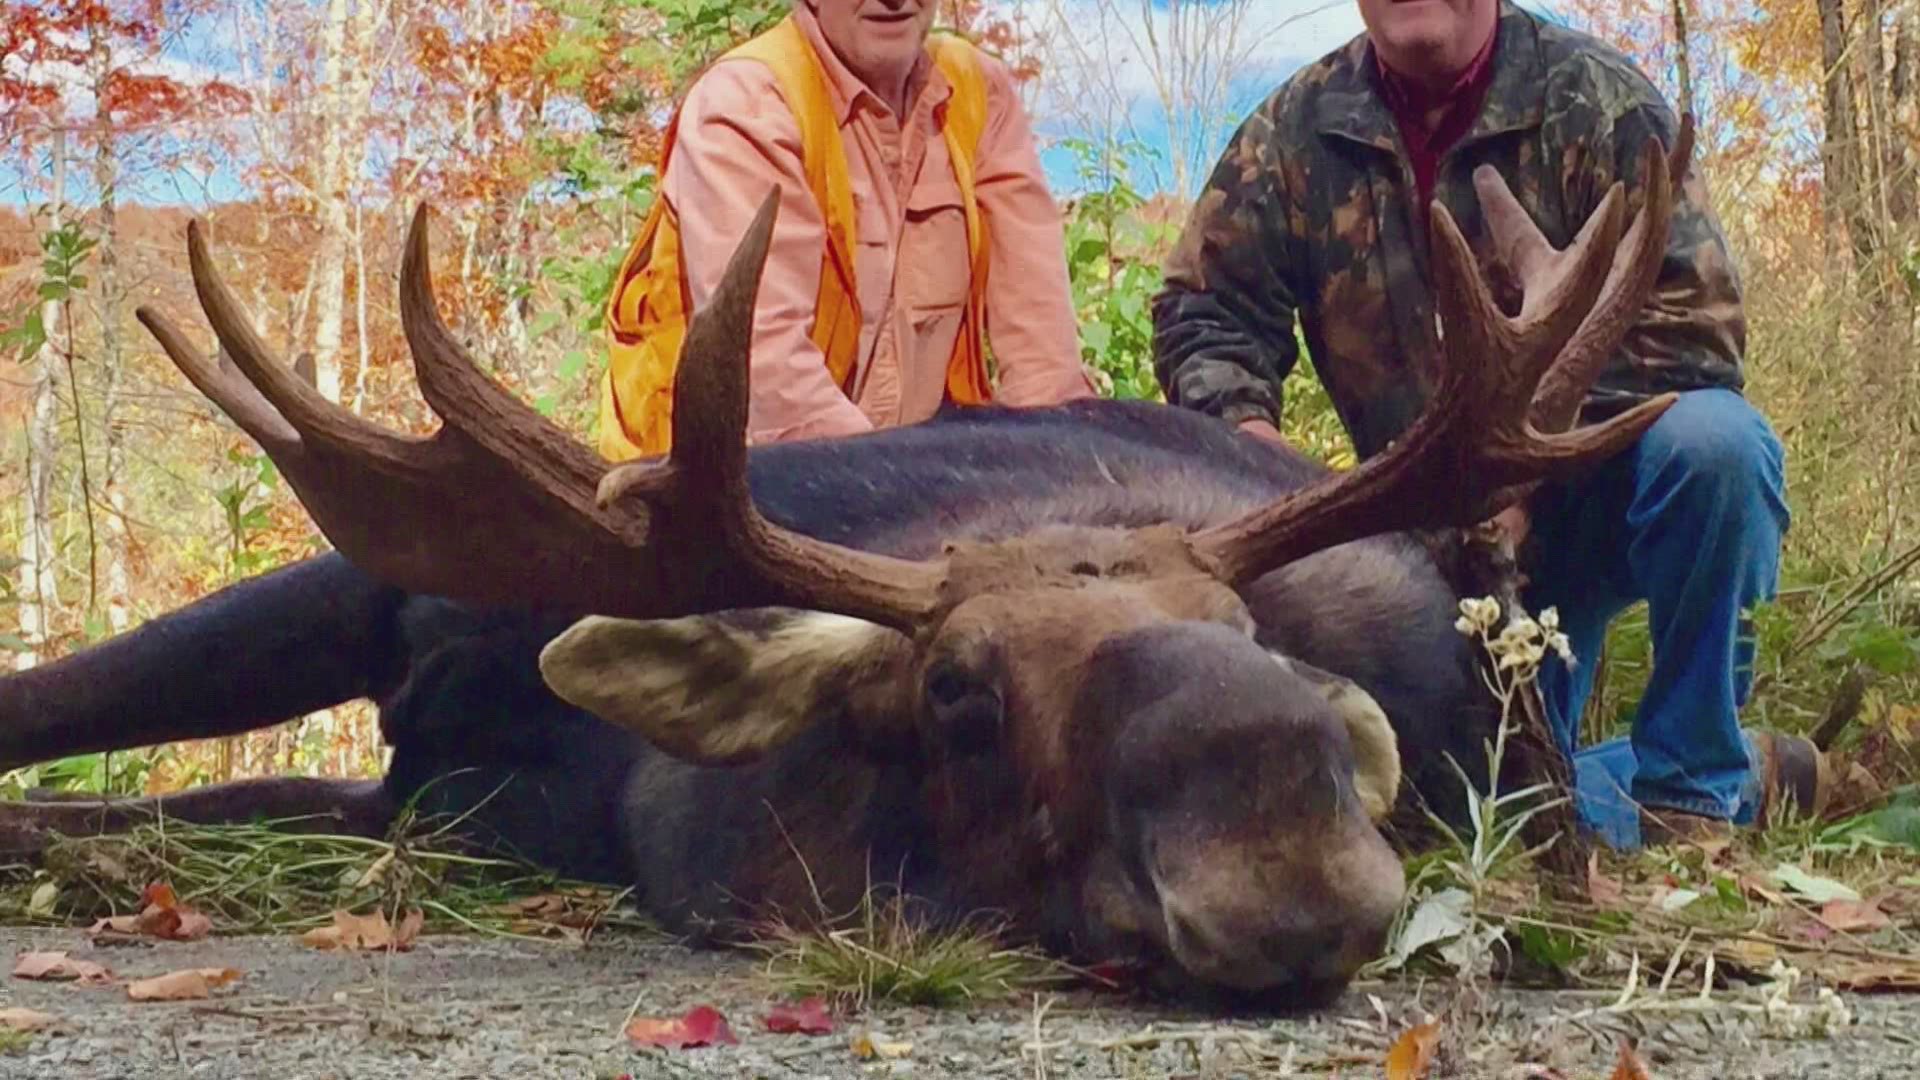 Maine could see one of the largest moose hunts this year, but state officials are pushing for safety